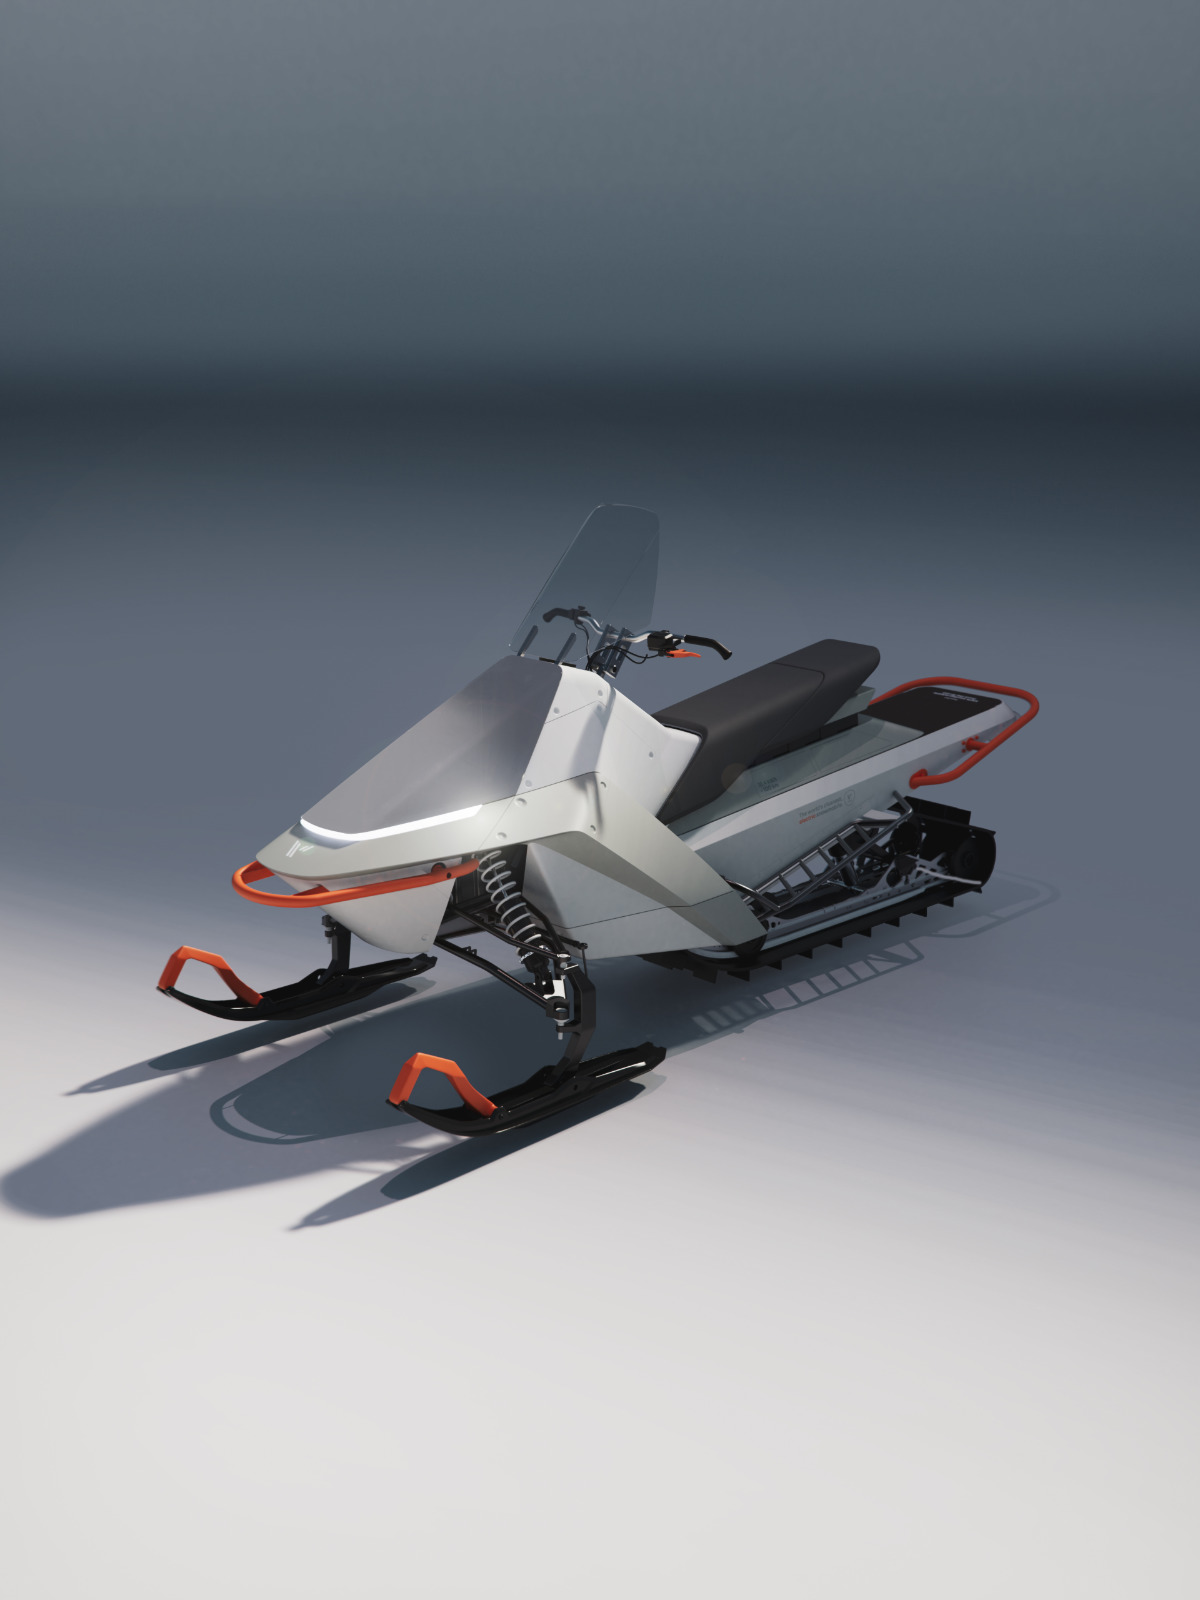 The Electric, Sustainable Snowmobile: Vidde Just Launched Their First Vehicle - Designed By Pininfar